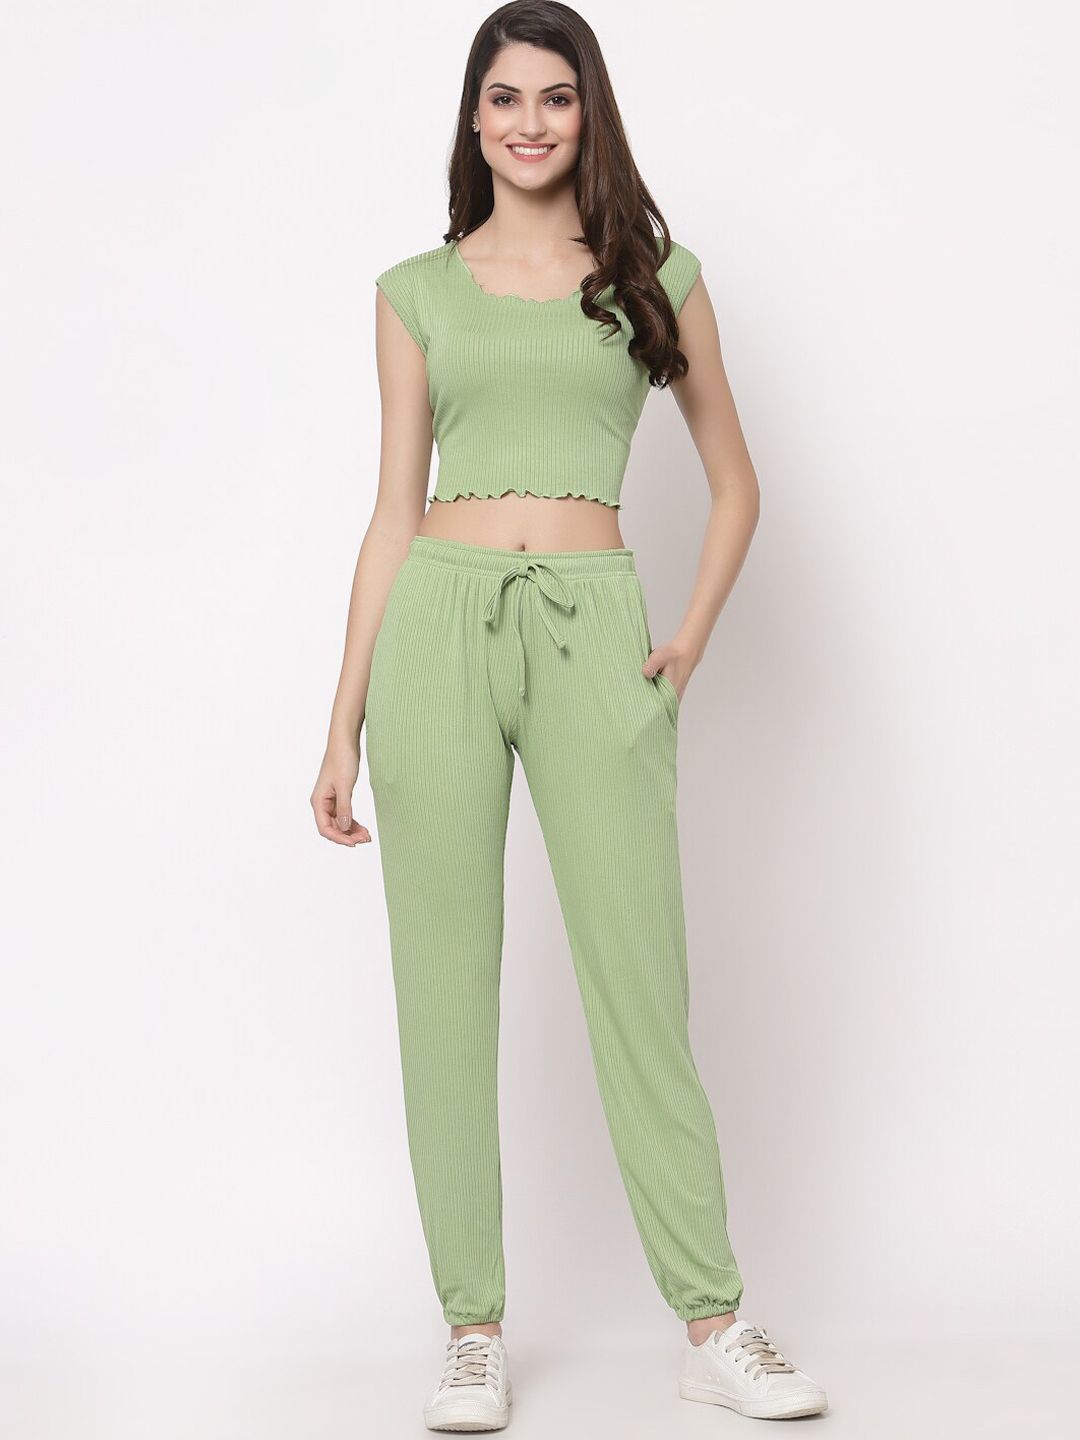 ASEELO Women's Sea Green Crop Top With Joggers Set Price in India